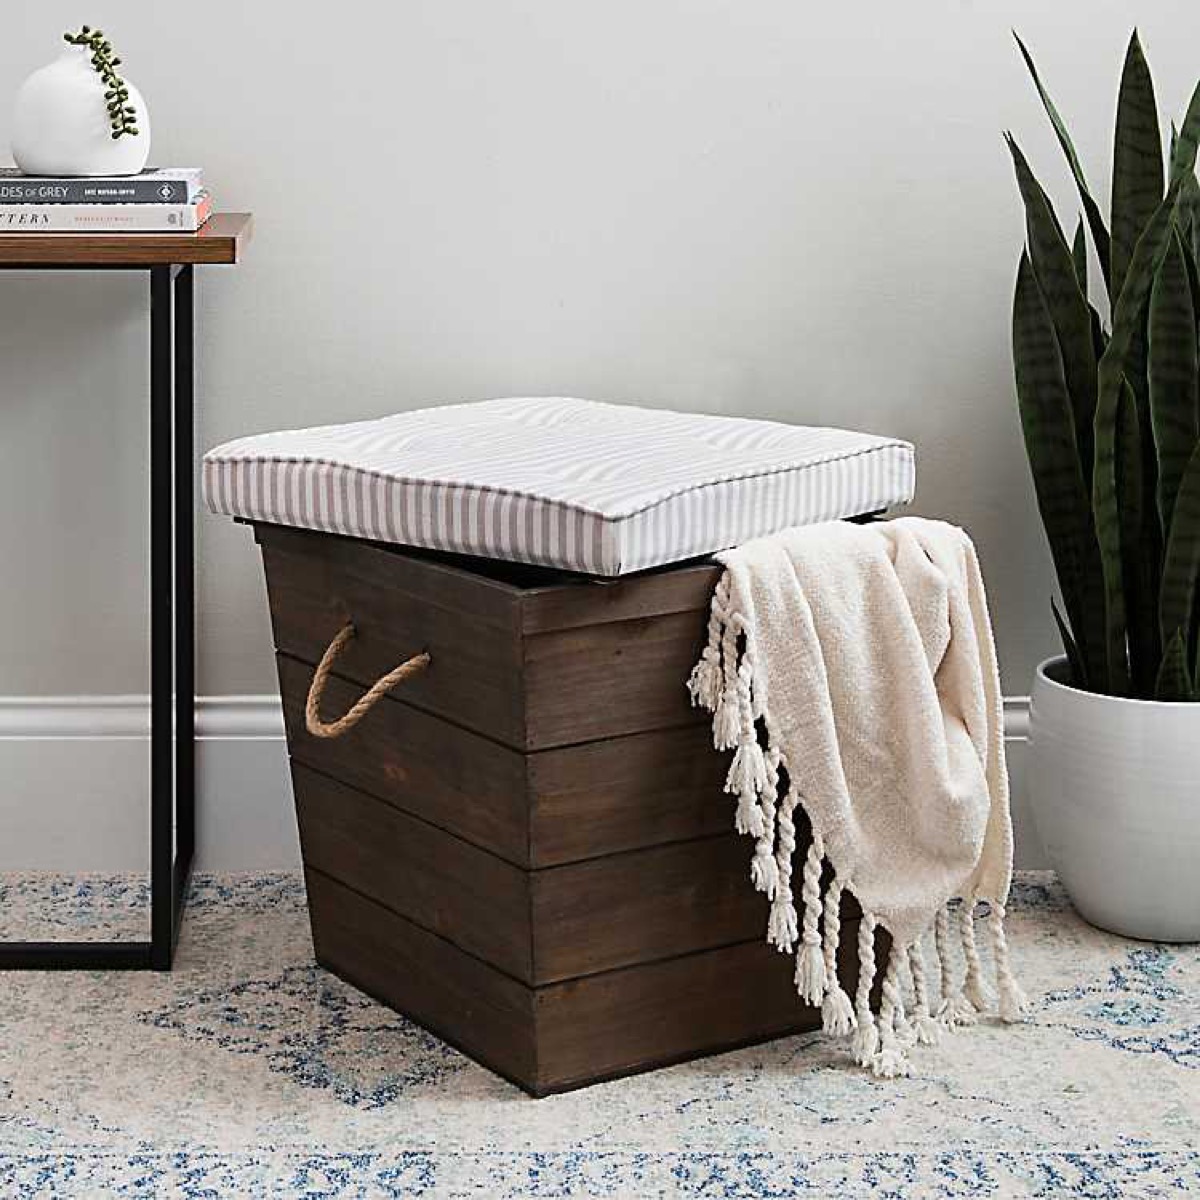 brown ottoman with white top and white blanket with tassels hanging over the side